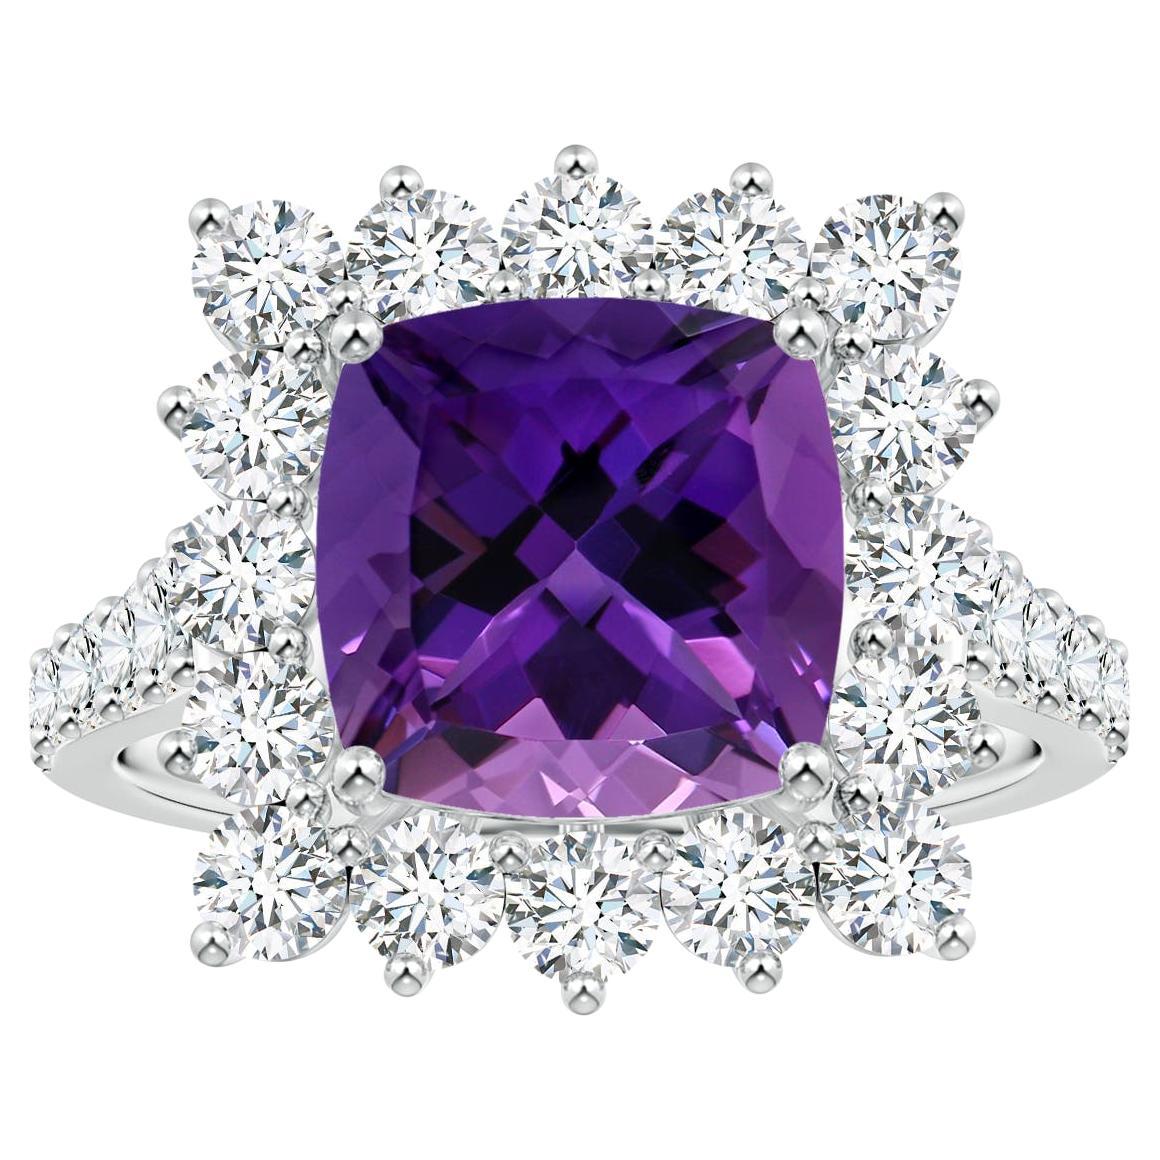 For Sale:  Angara Princess Diana Inspired Gia Certified Cushion Amethyst Ring in Platinum